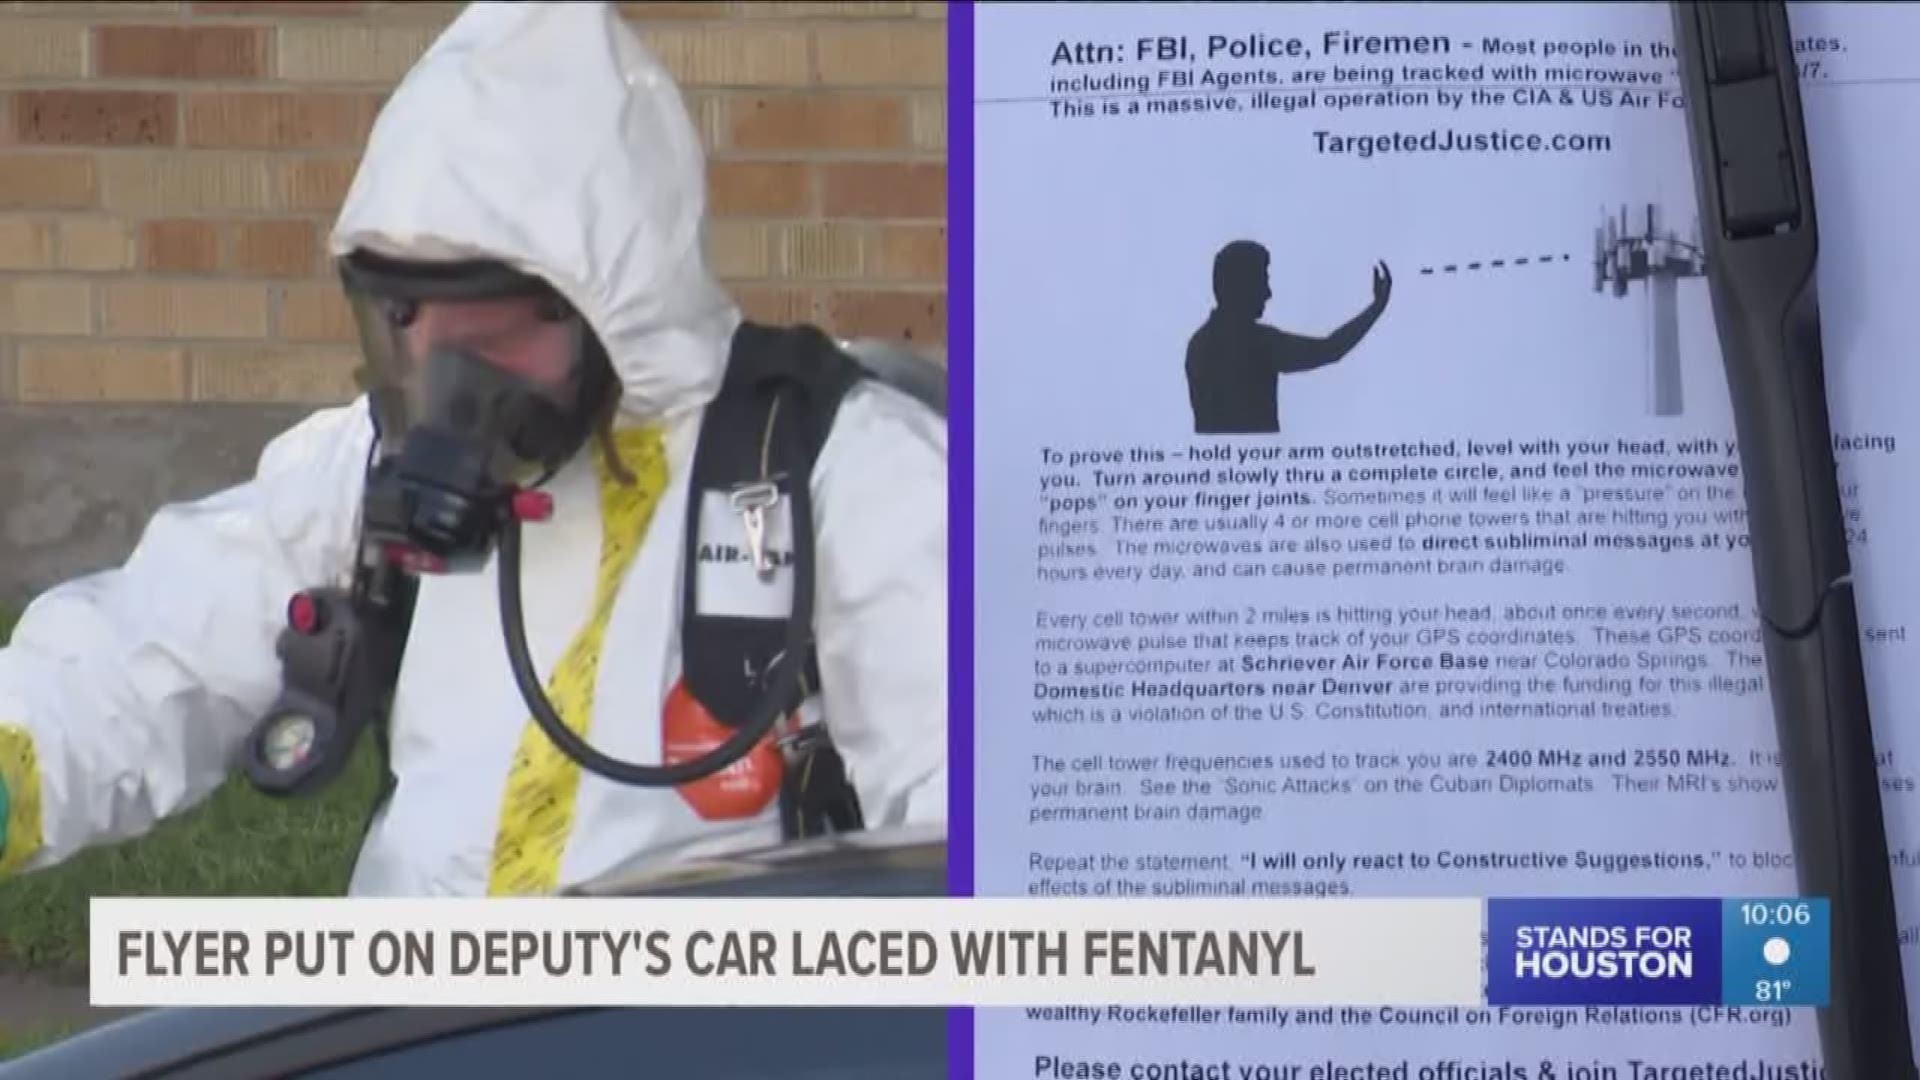 A Harris County Precinct 5 deputy received medical treatment after coming into contact with a flyer now being tested for fentanyl.